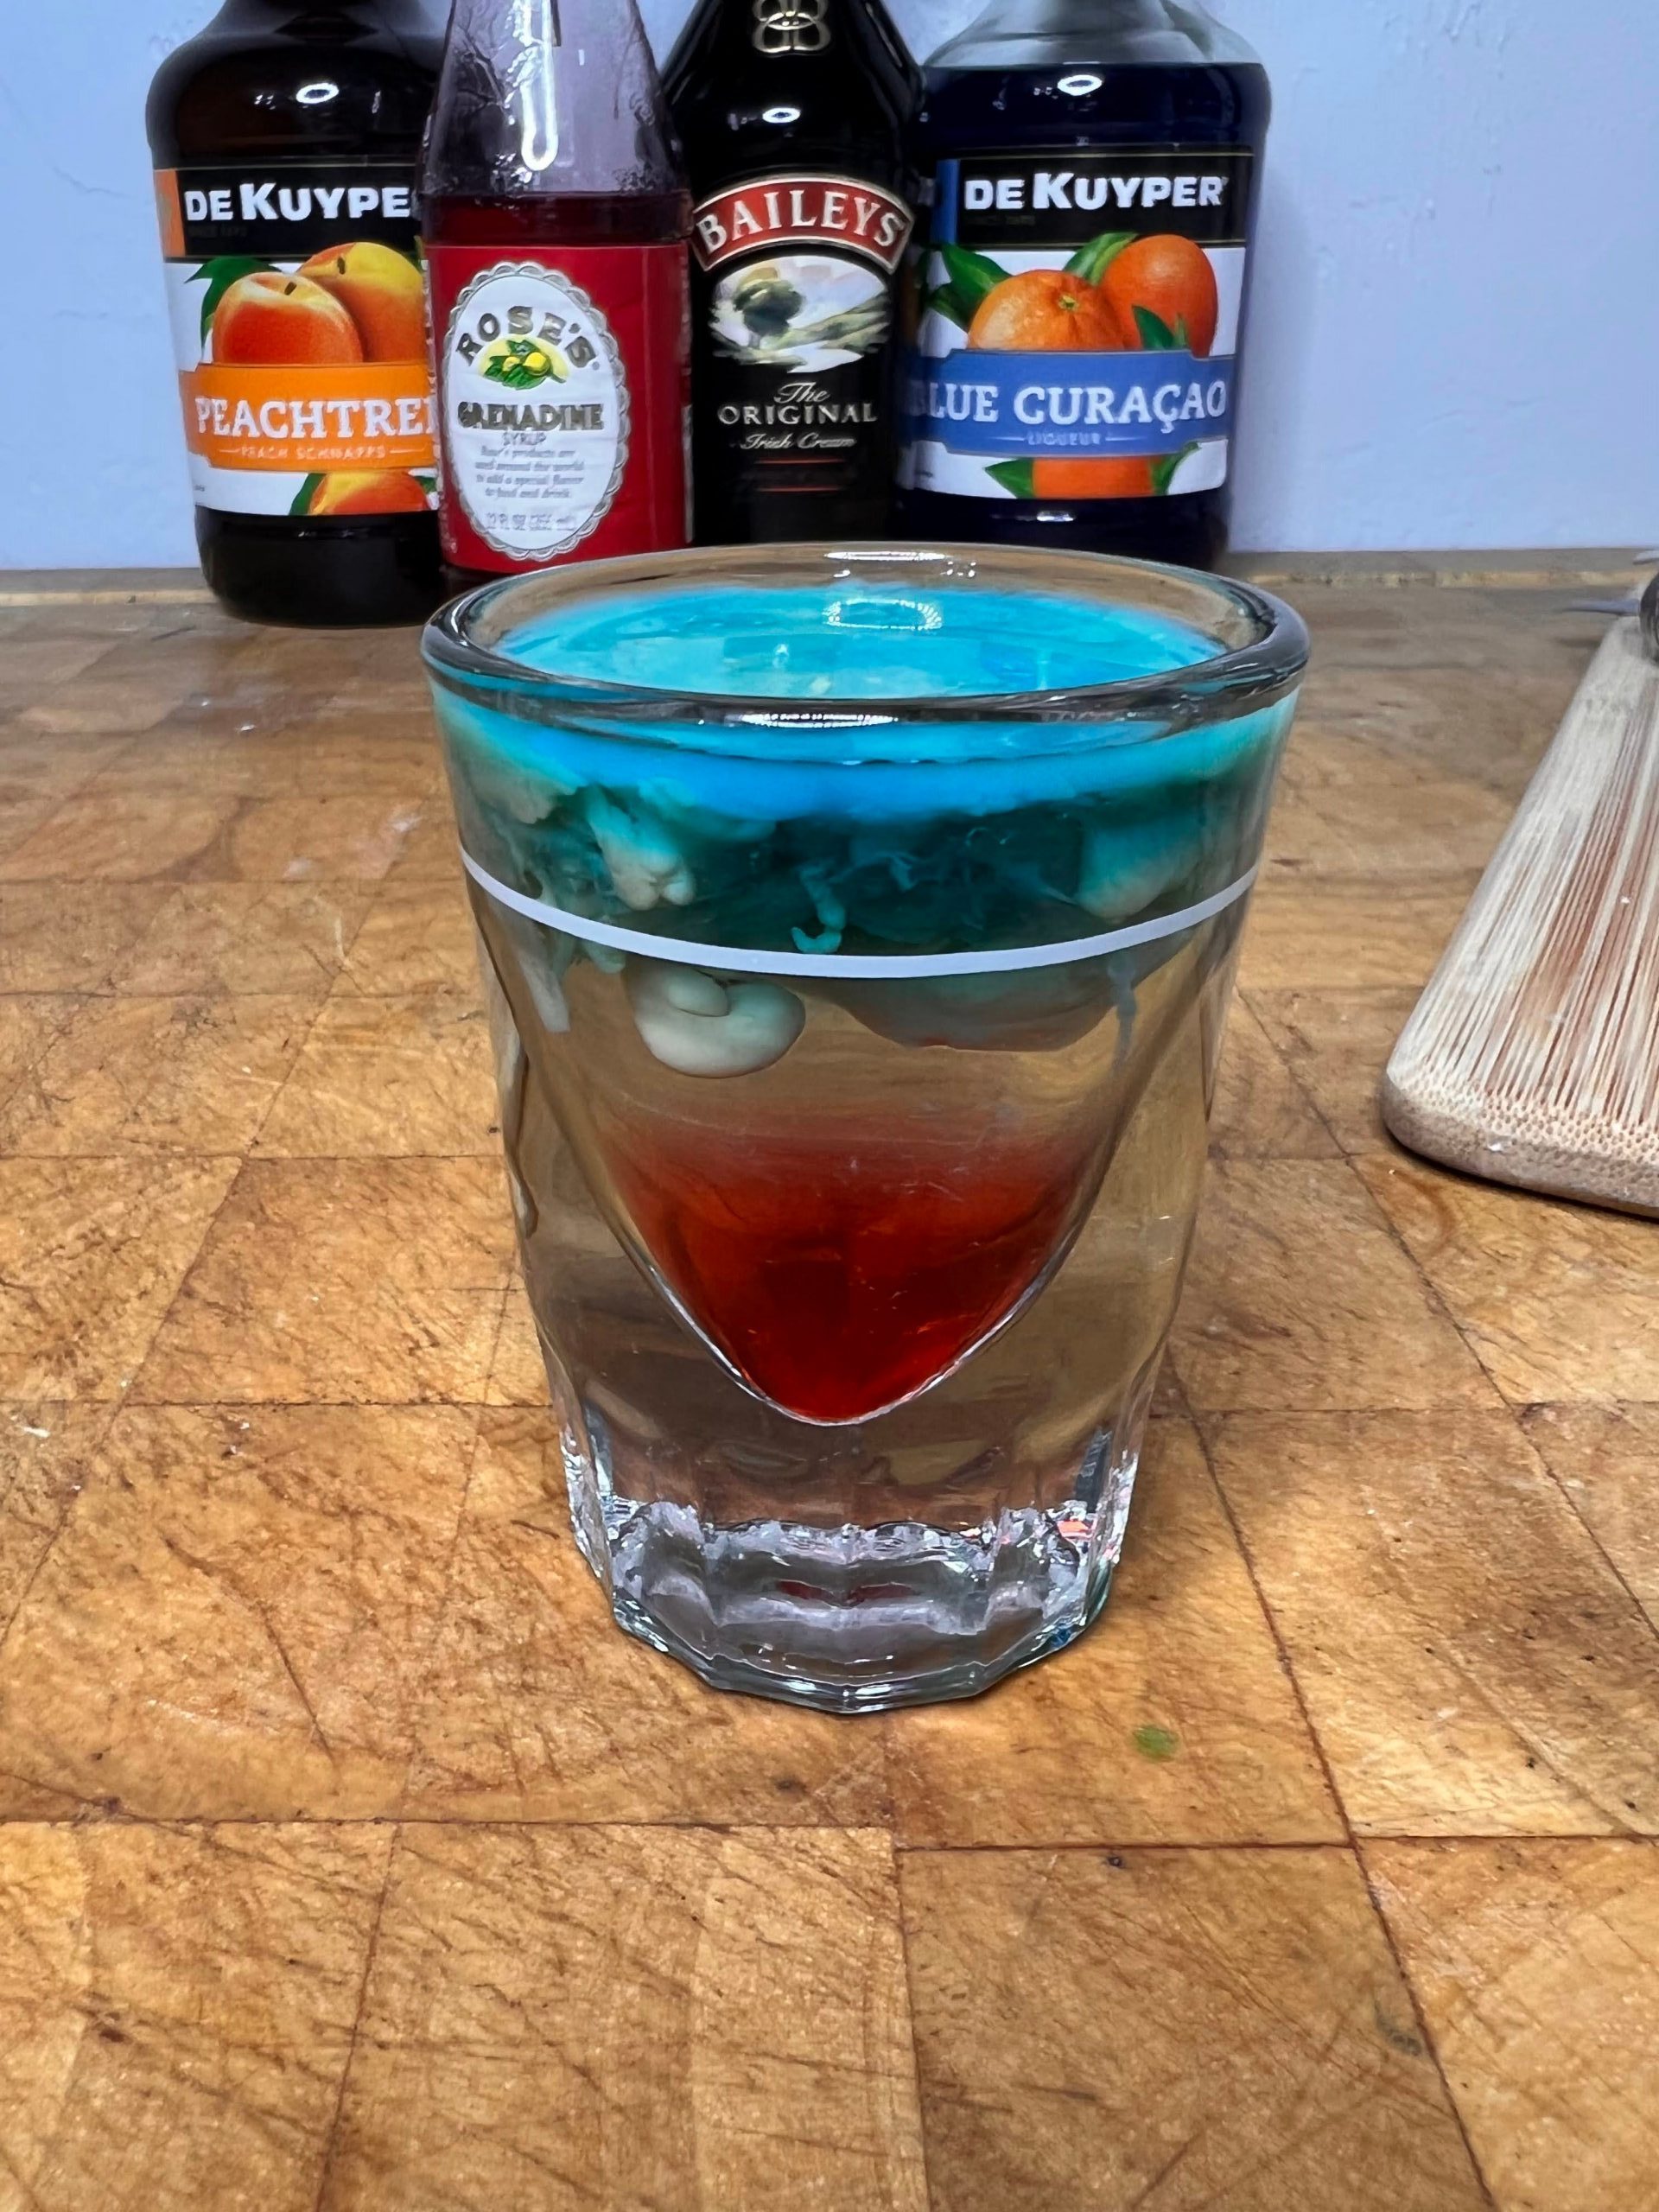 shot glass with alien brain hemmorage with liquor bottles visible in the background